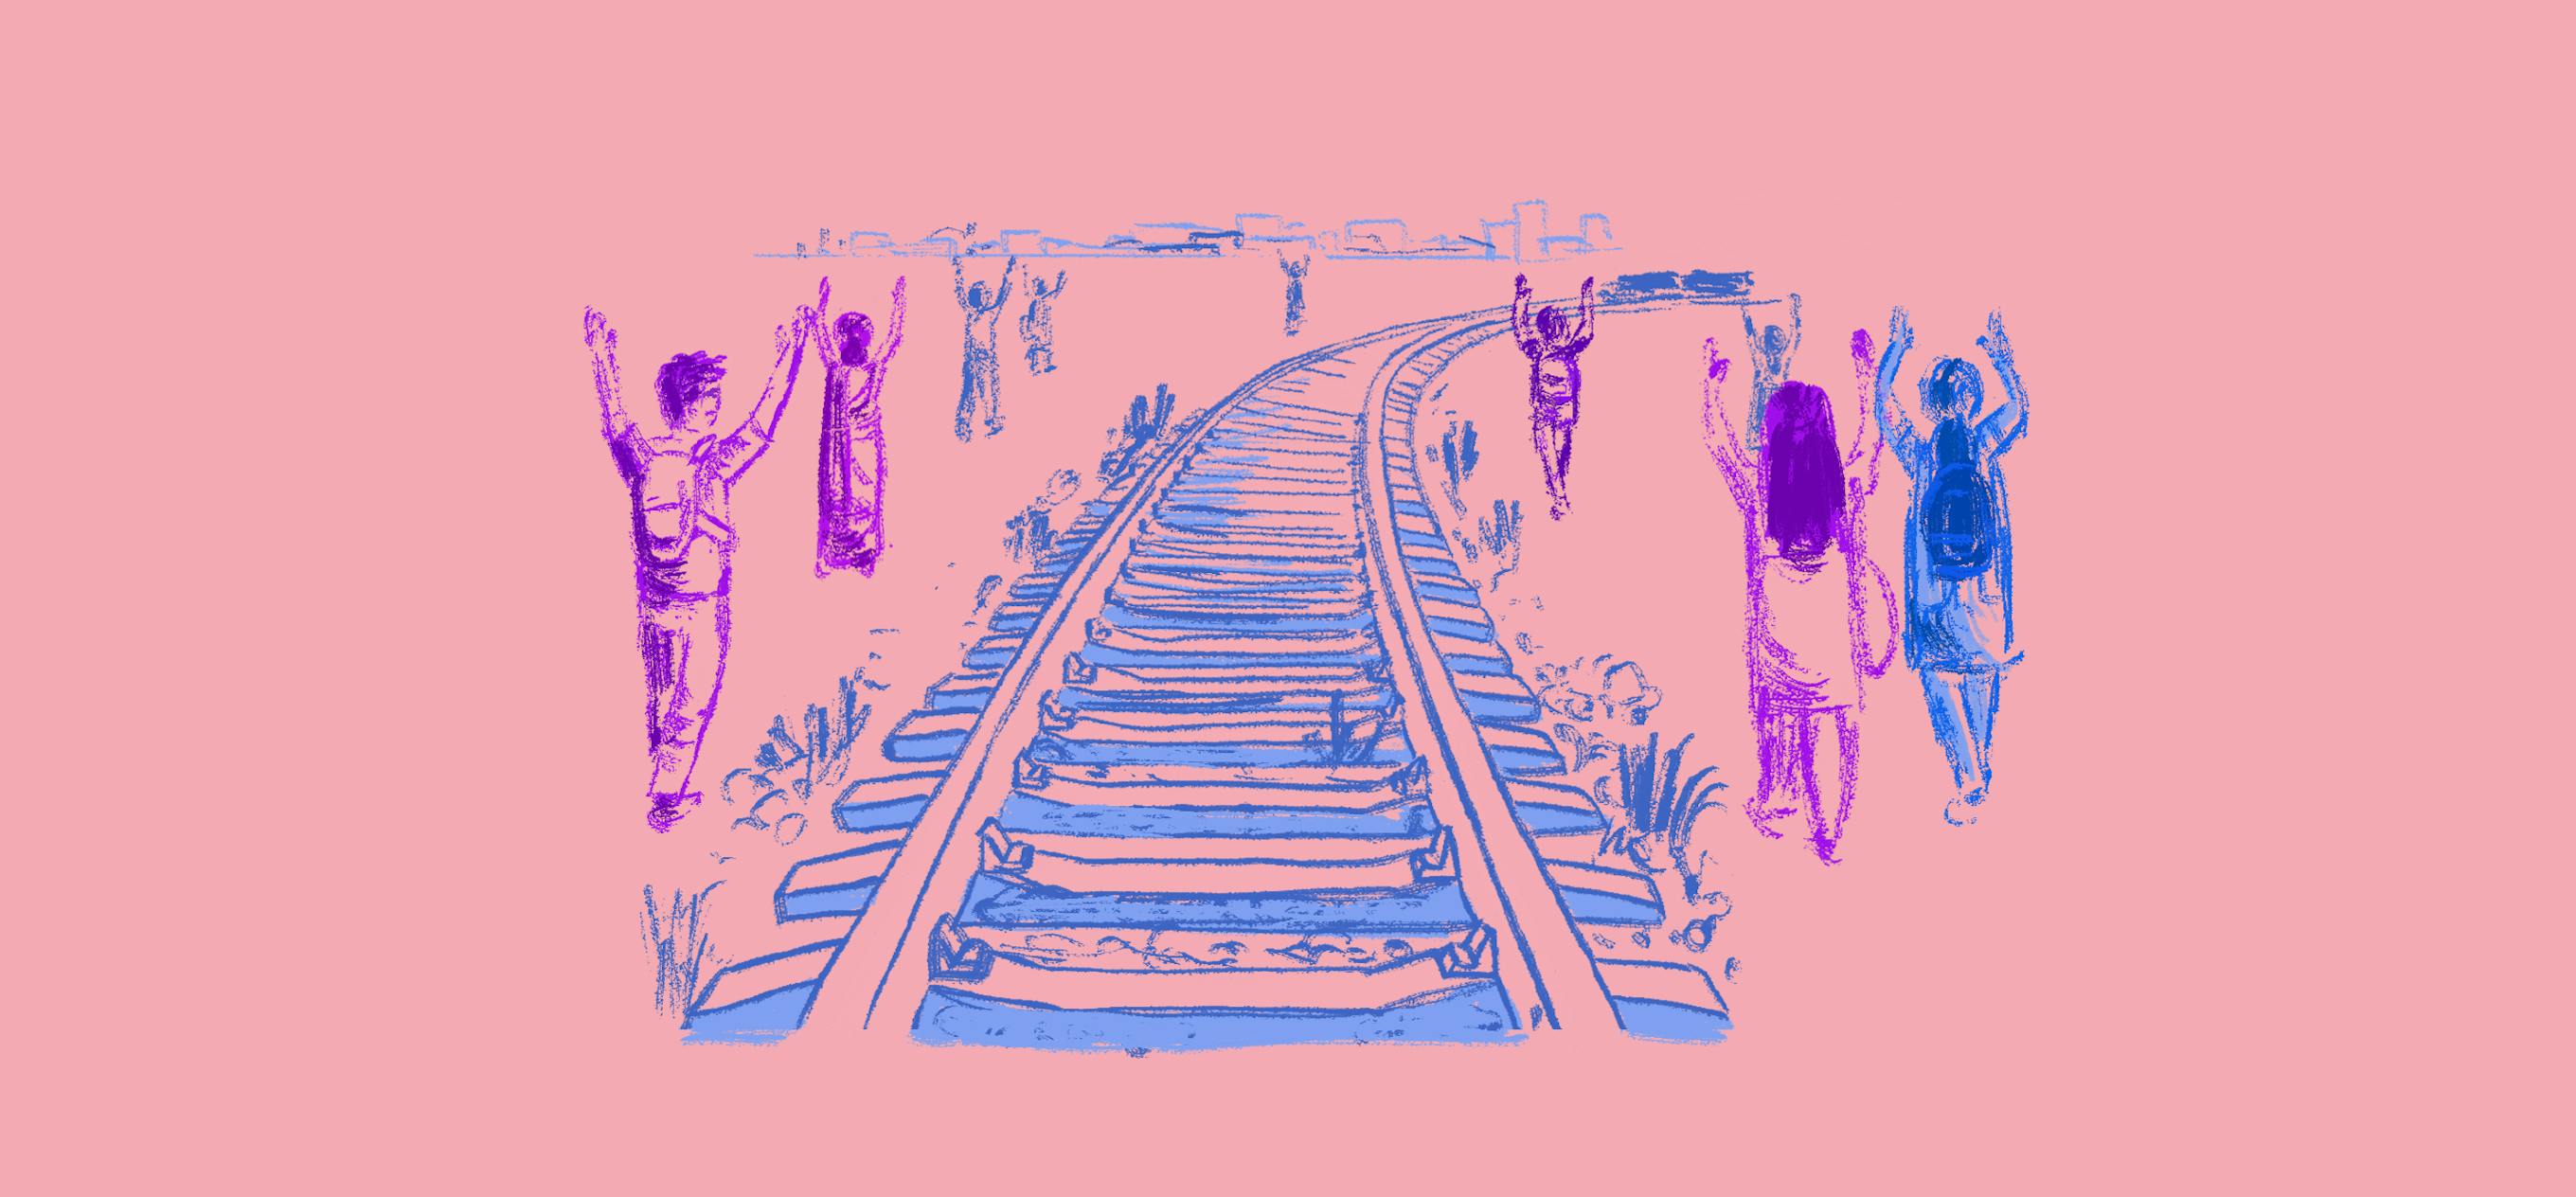 Footsoldiers by Prabhanu Kumar Das; Illustration by Akshaya Zachariah for FiftyTwo.in